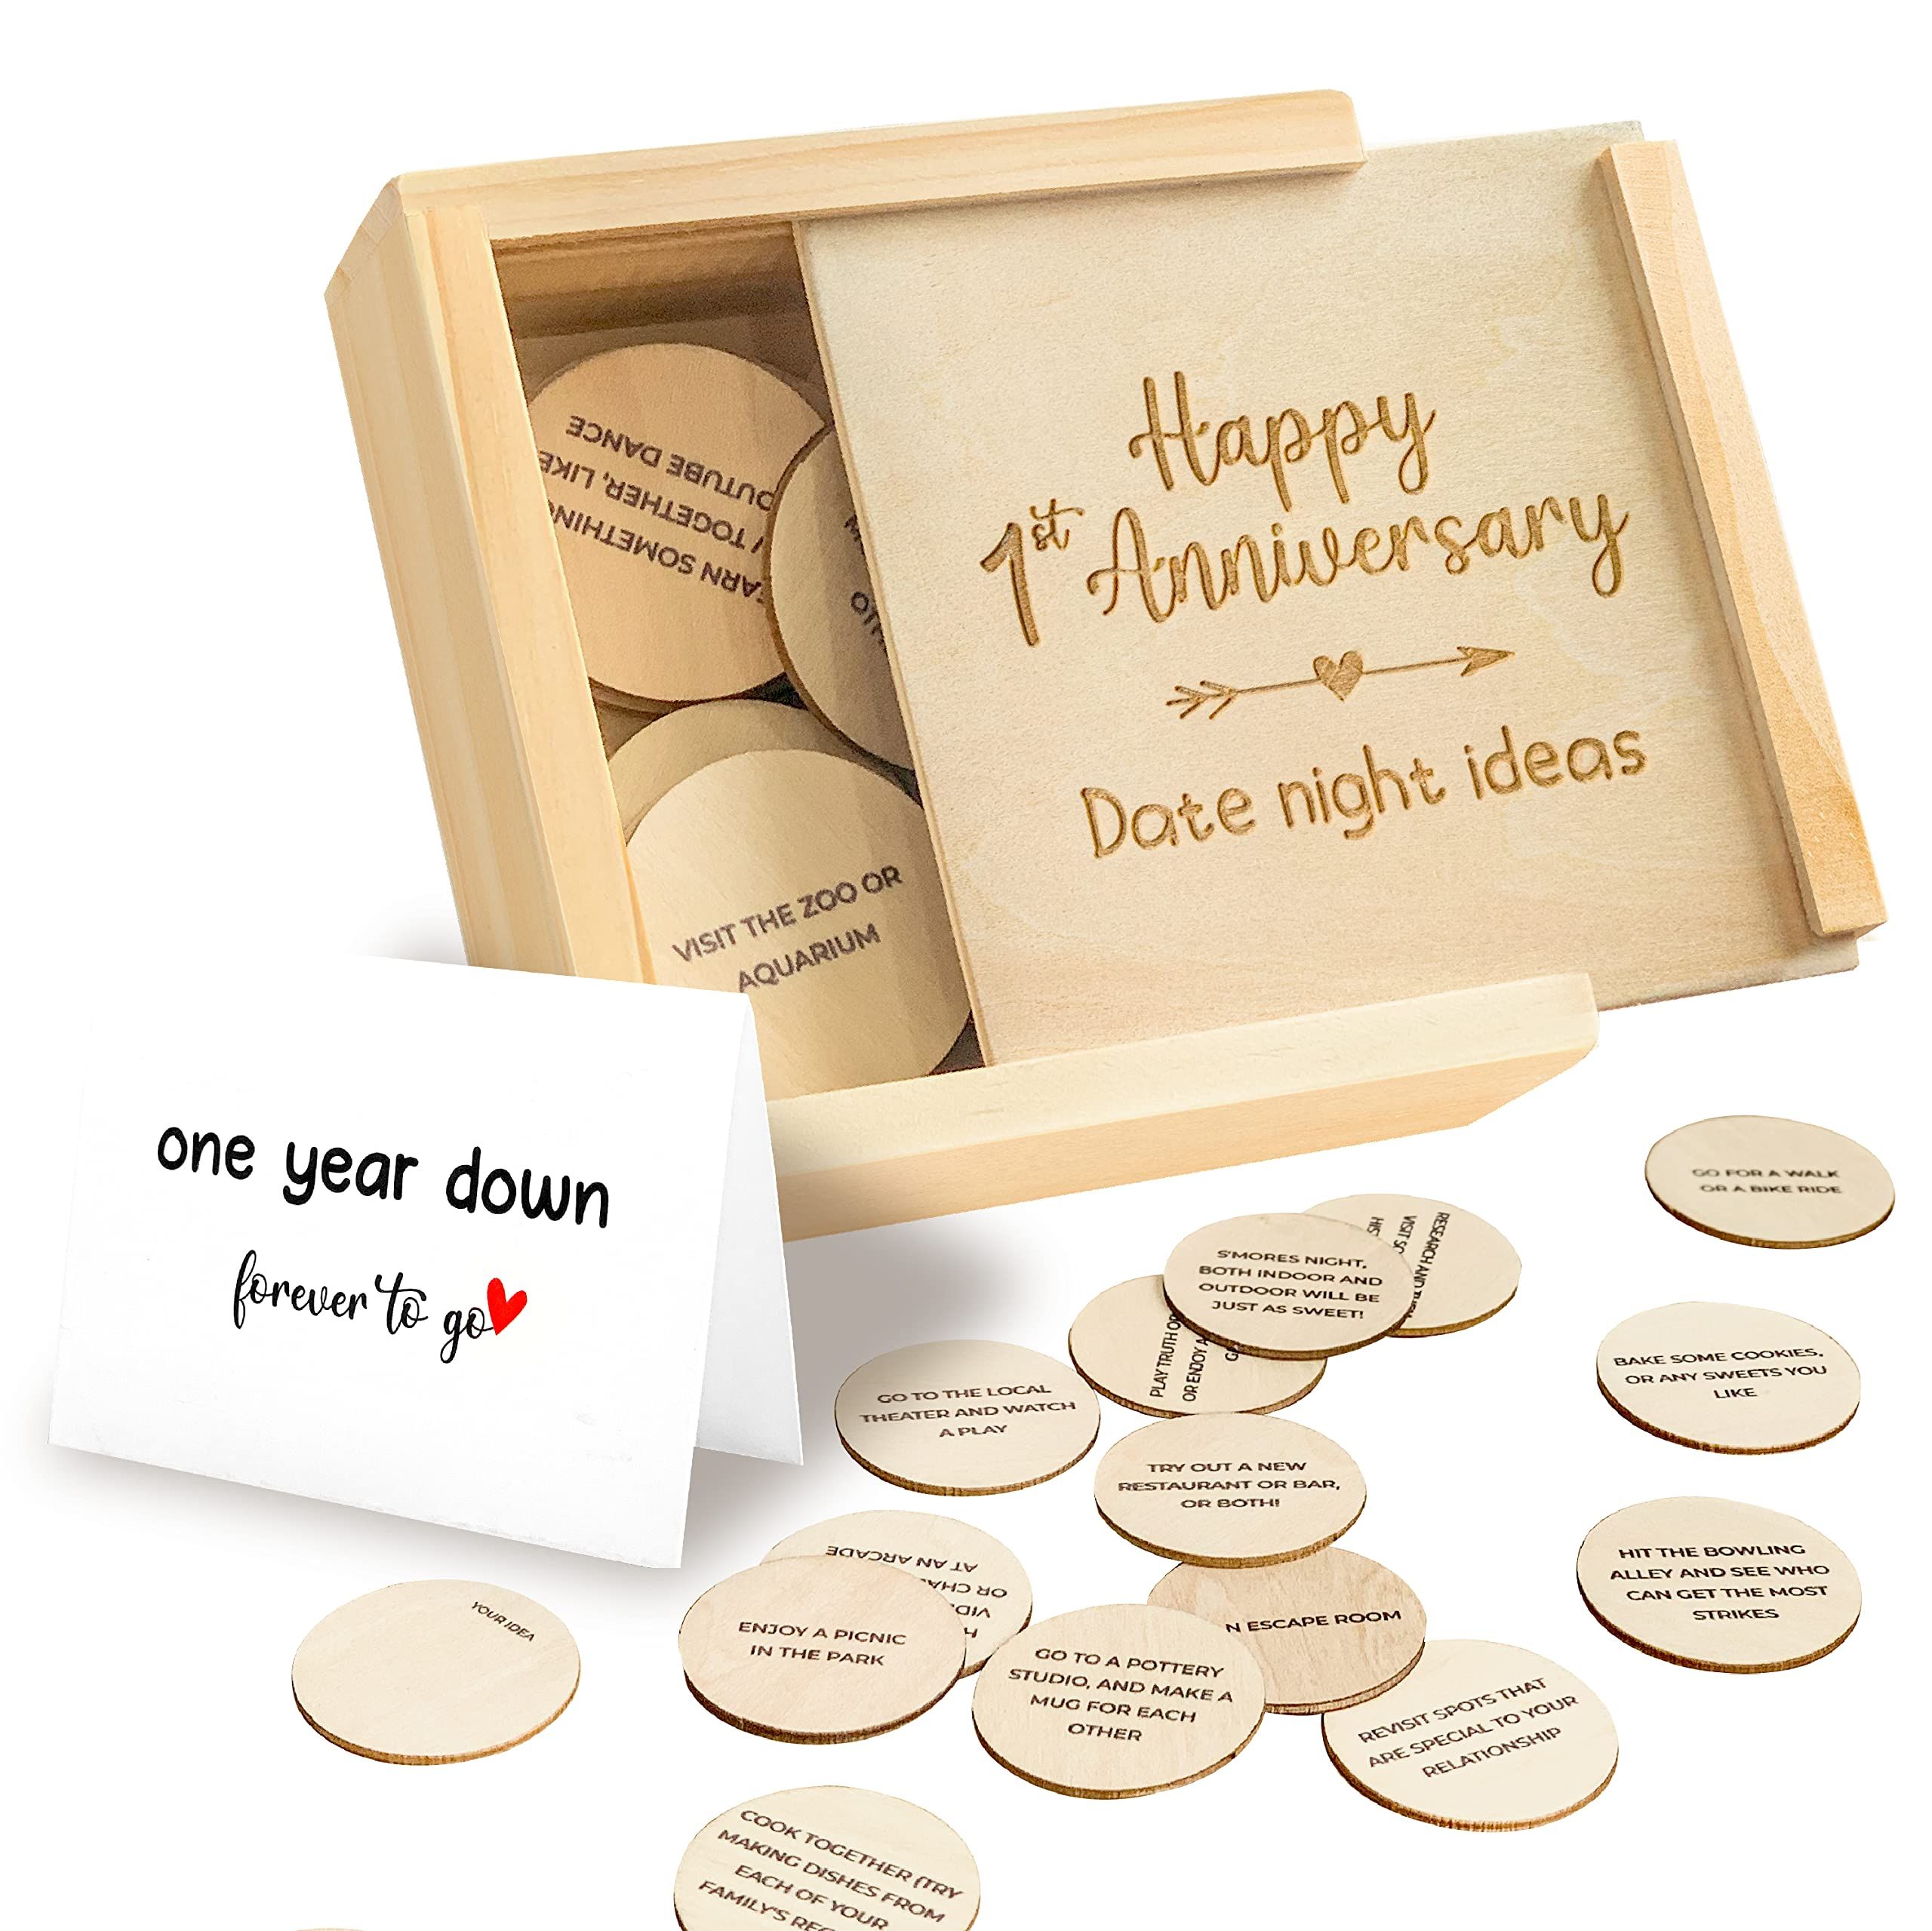 Creative Gifts For Your First Anniversary | Burgh Brides